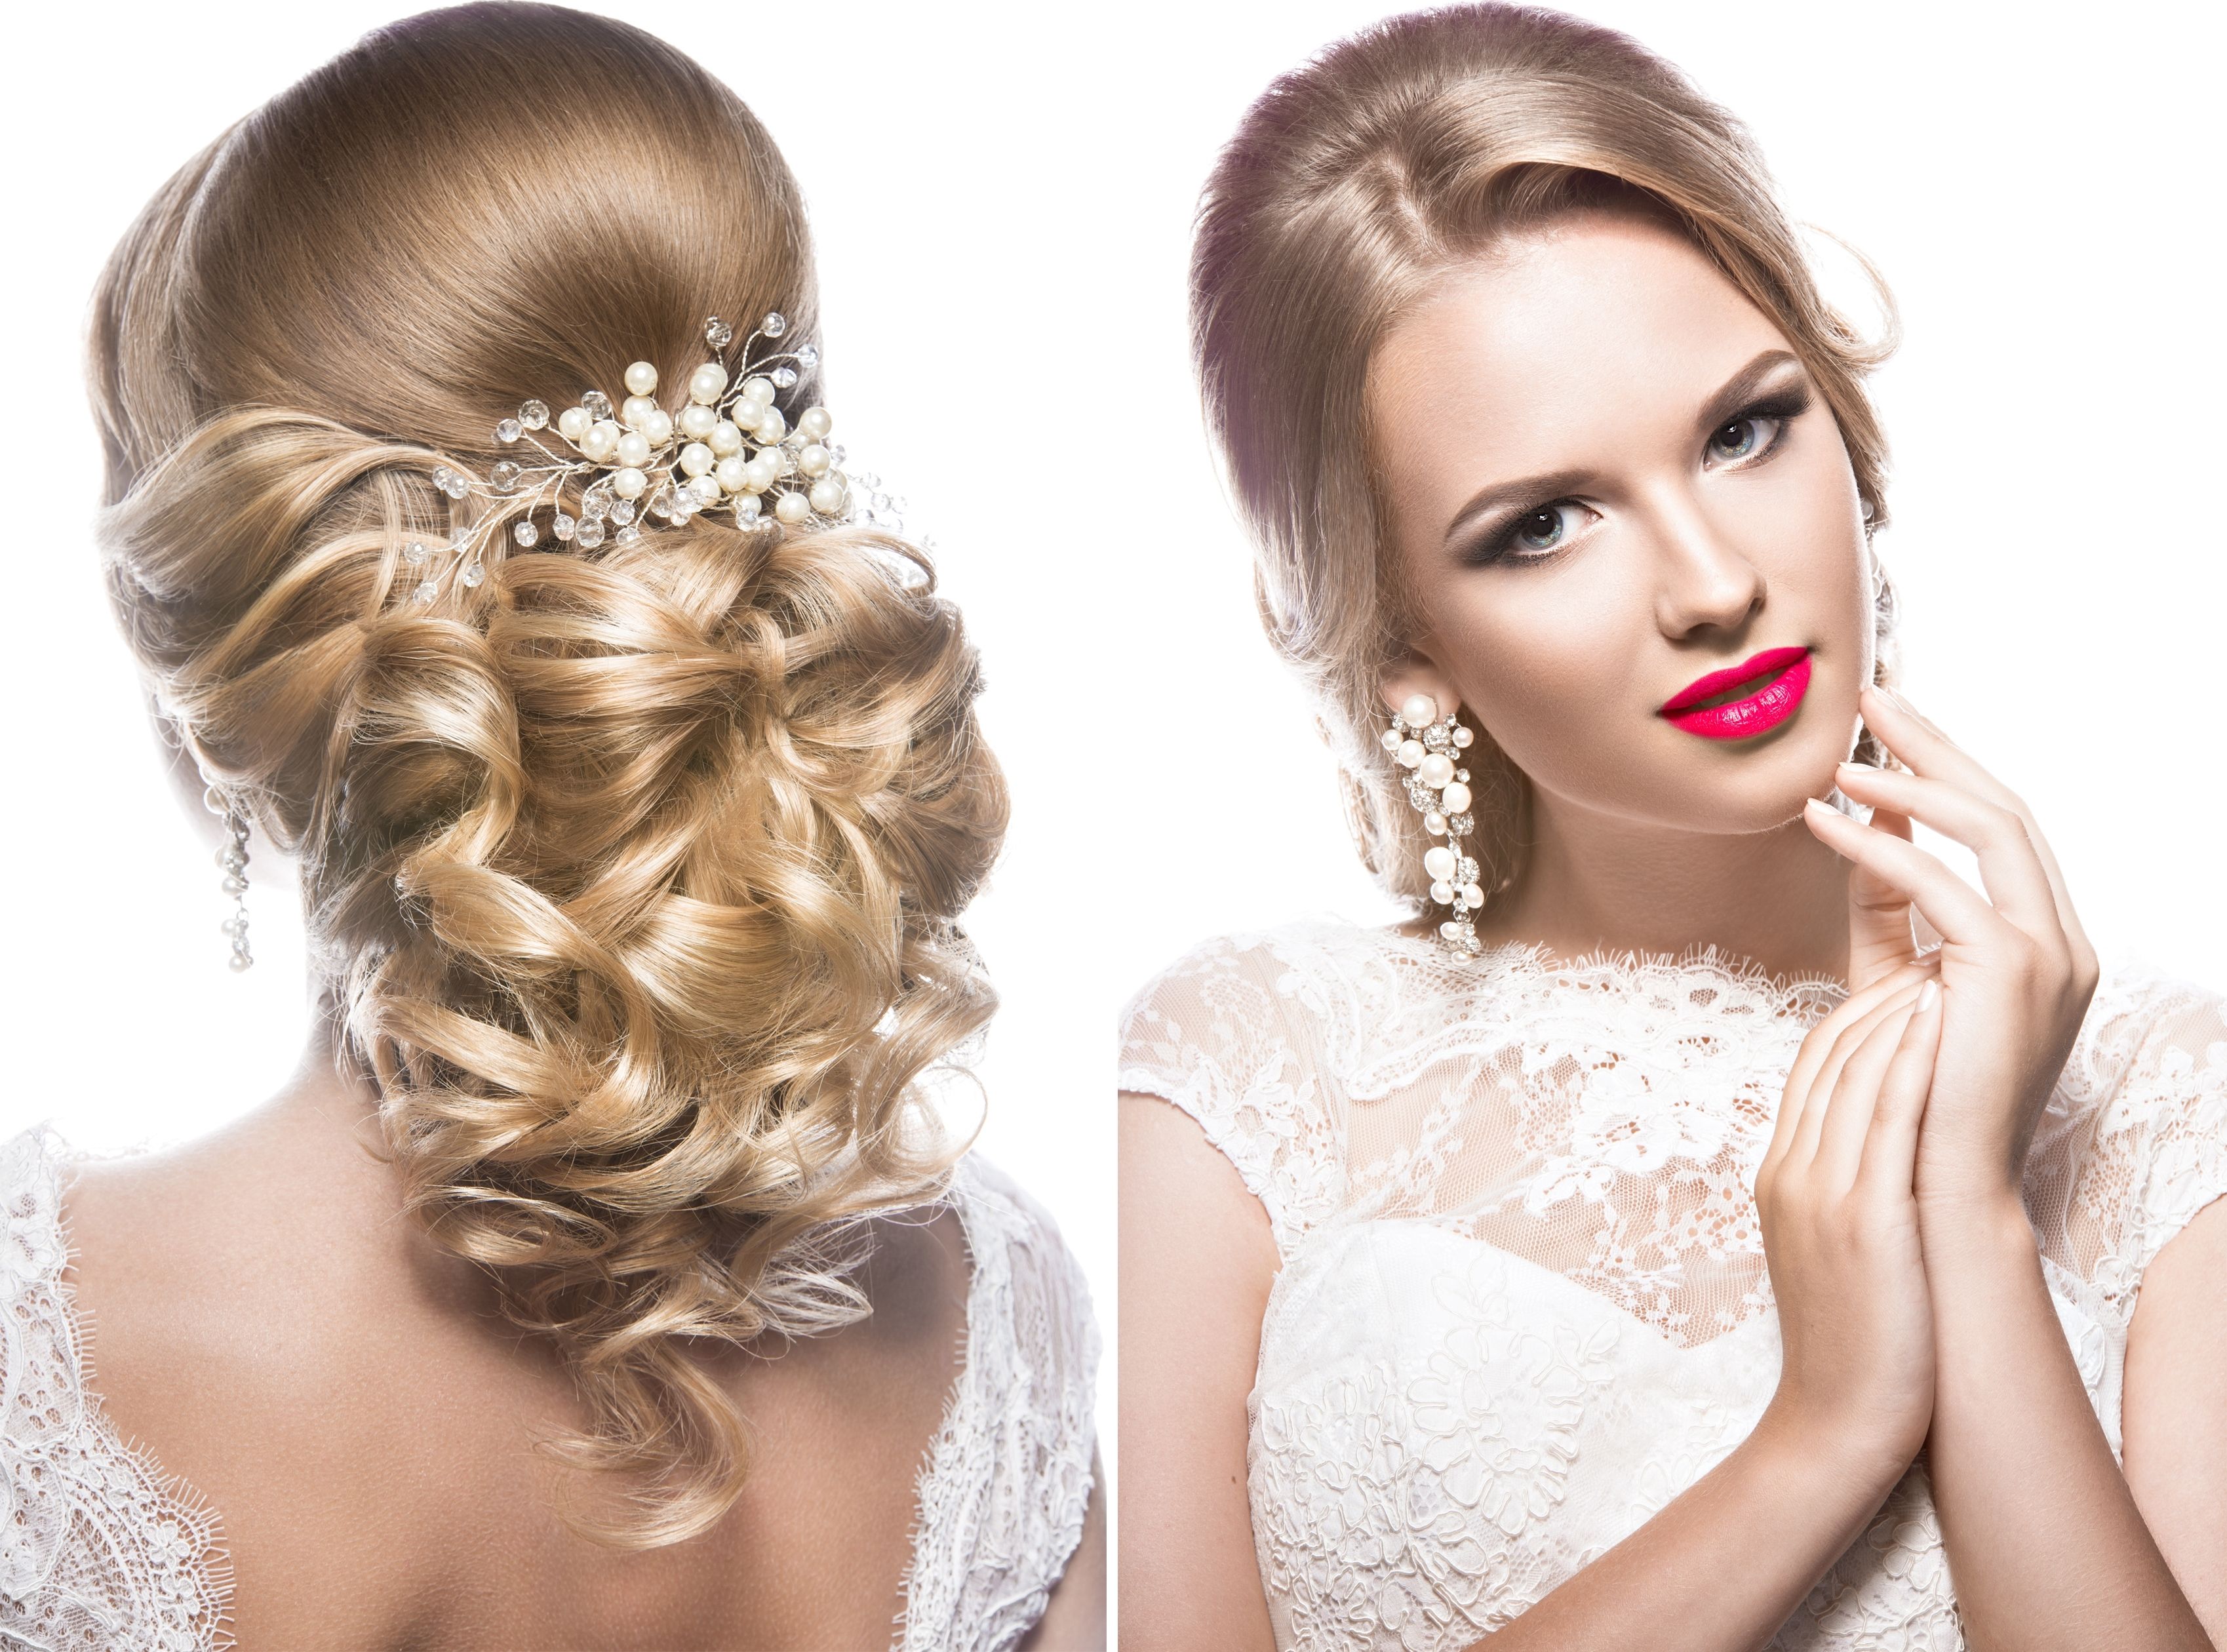 Trendy Wedding Hairstyles For Oval Face For How To Get Beautiful Hair On Your Wedding Day With Hair Extensions (View 10 of 15)